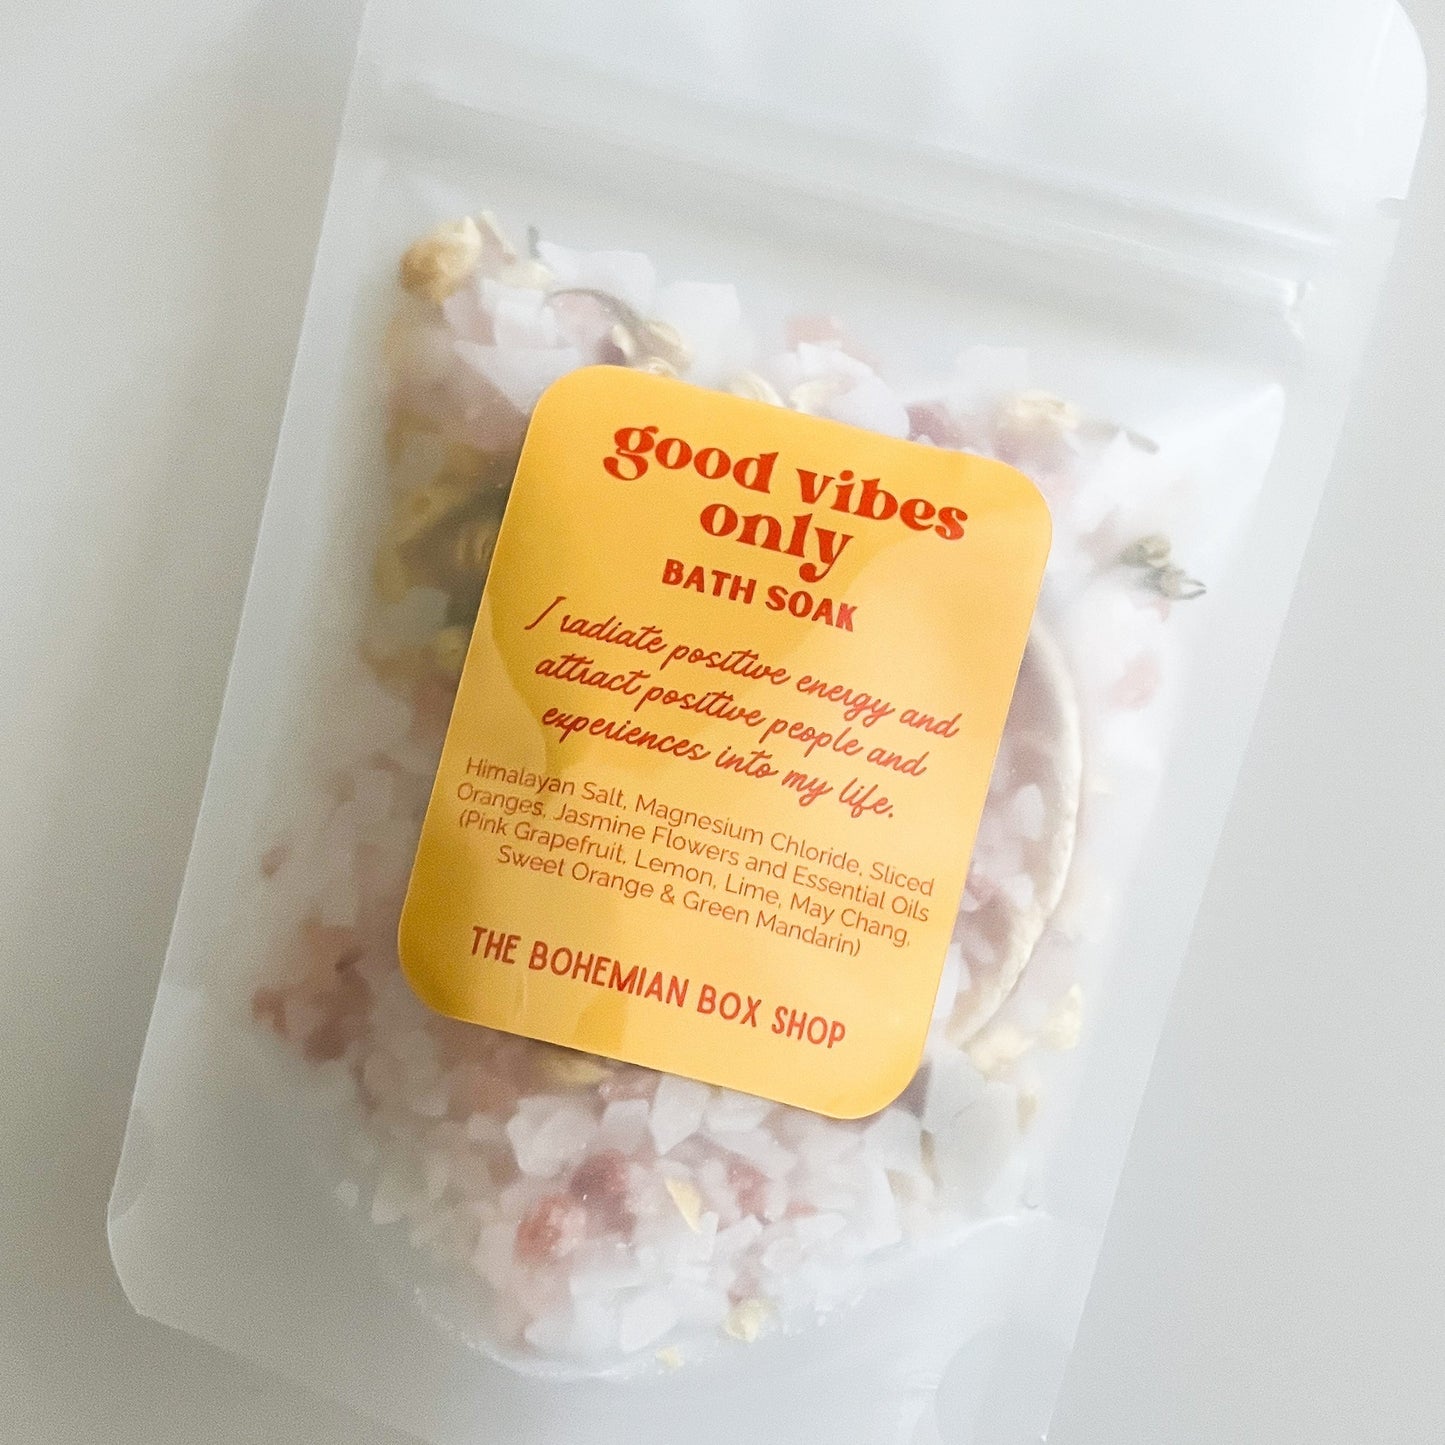 Good Vibes Only Bath Soak With Affirmation / Bath Salts For Attracting Positive Energy, Healing Energy, High Vibrations